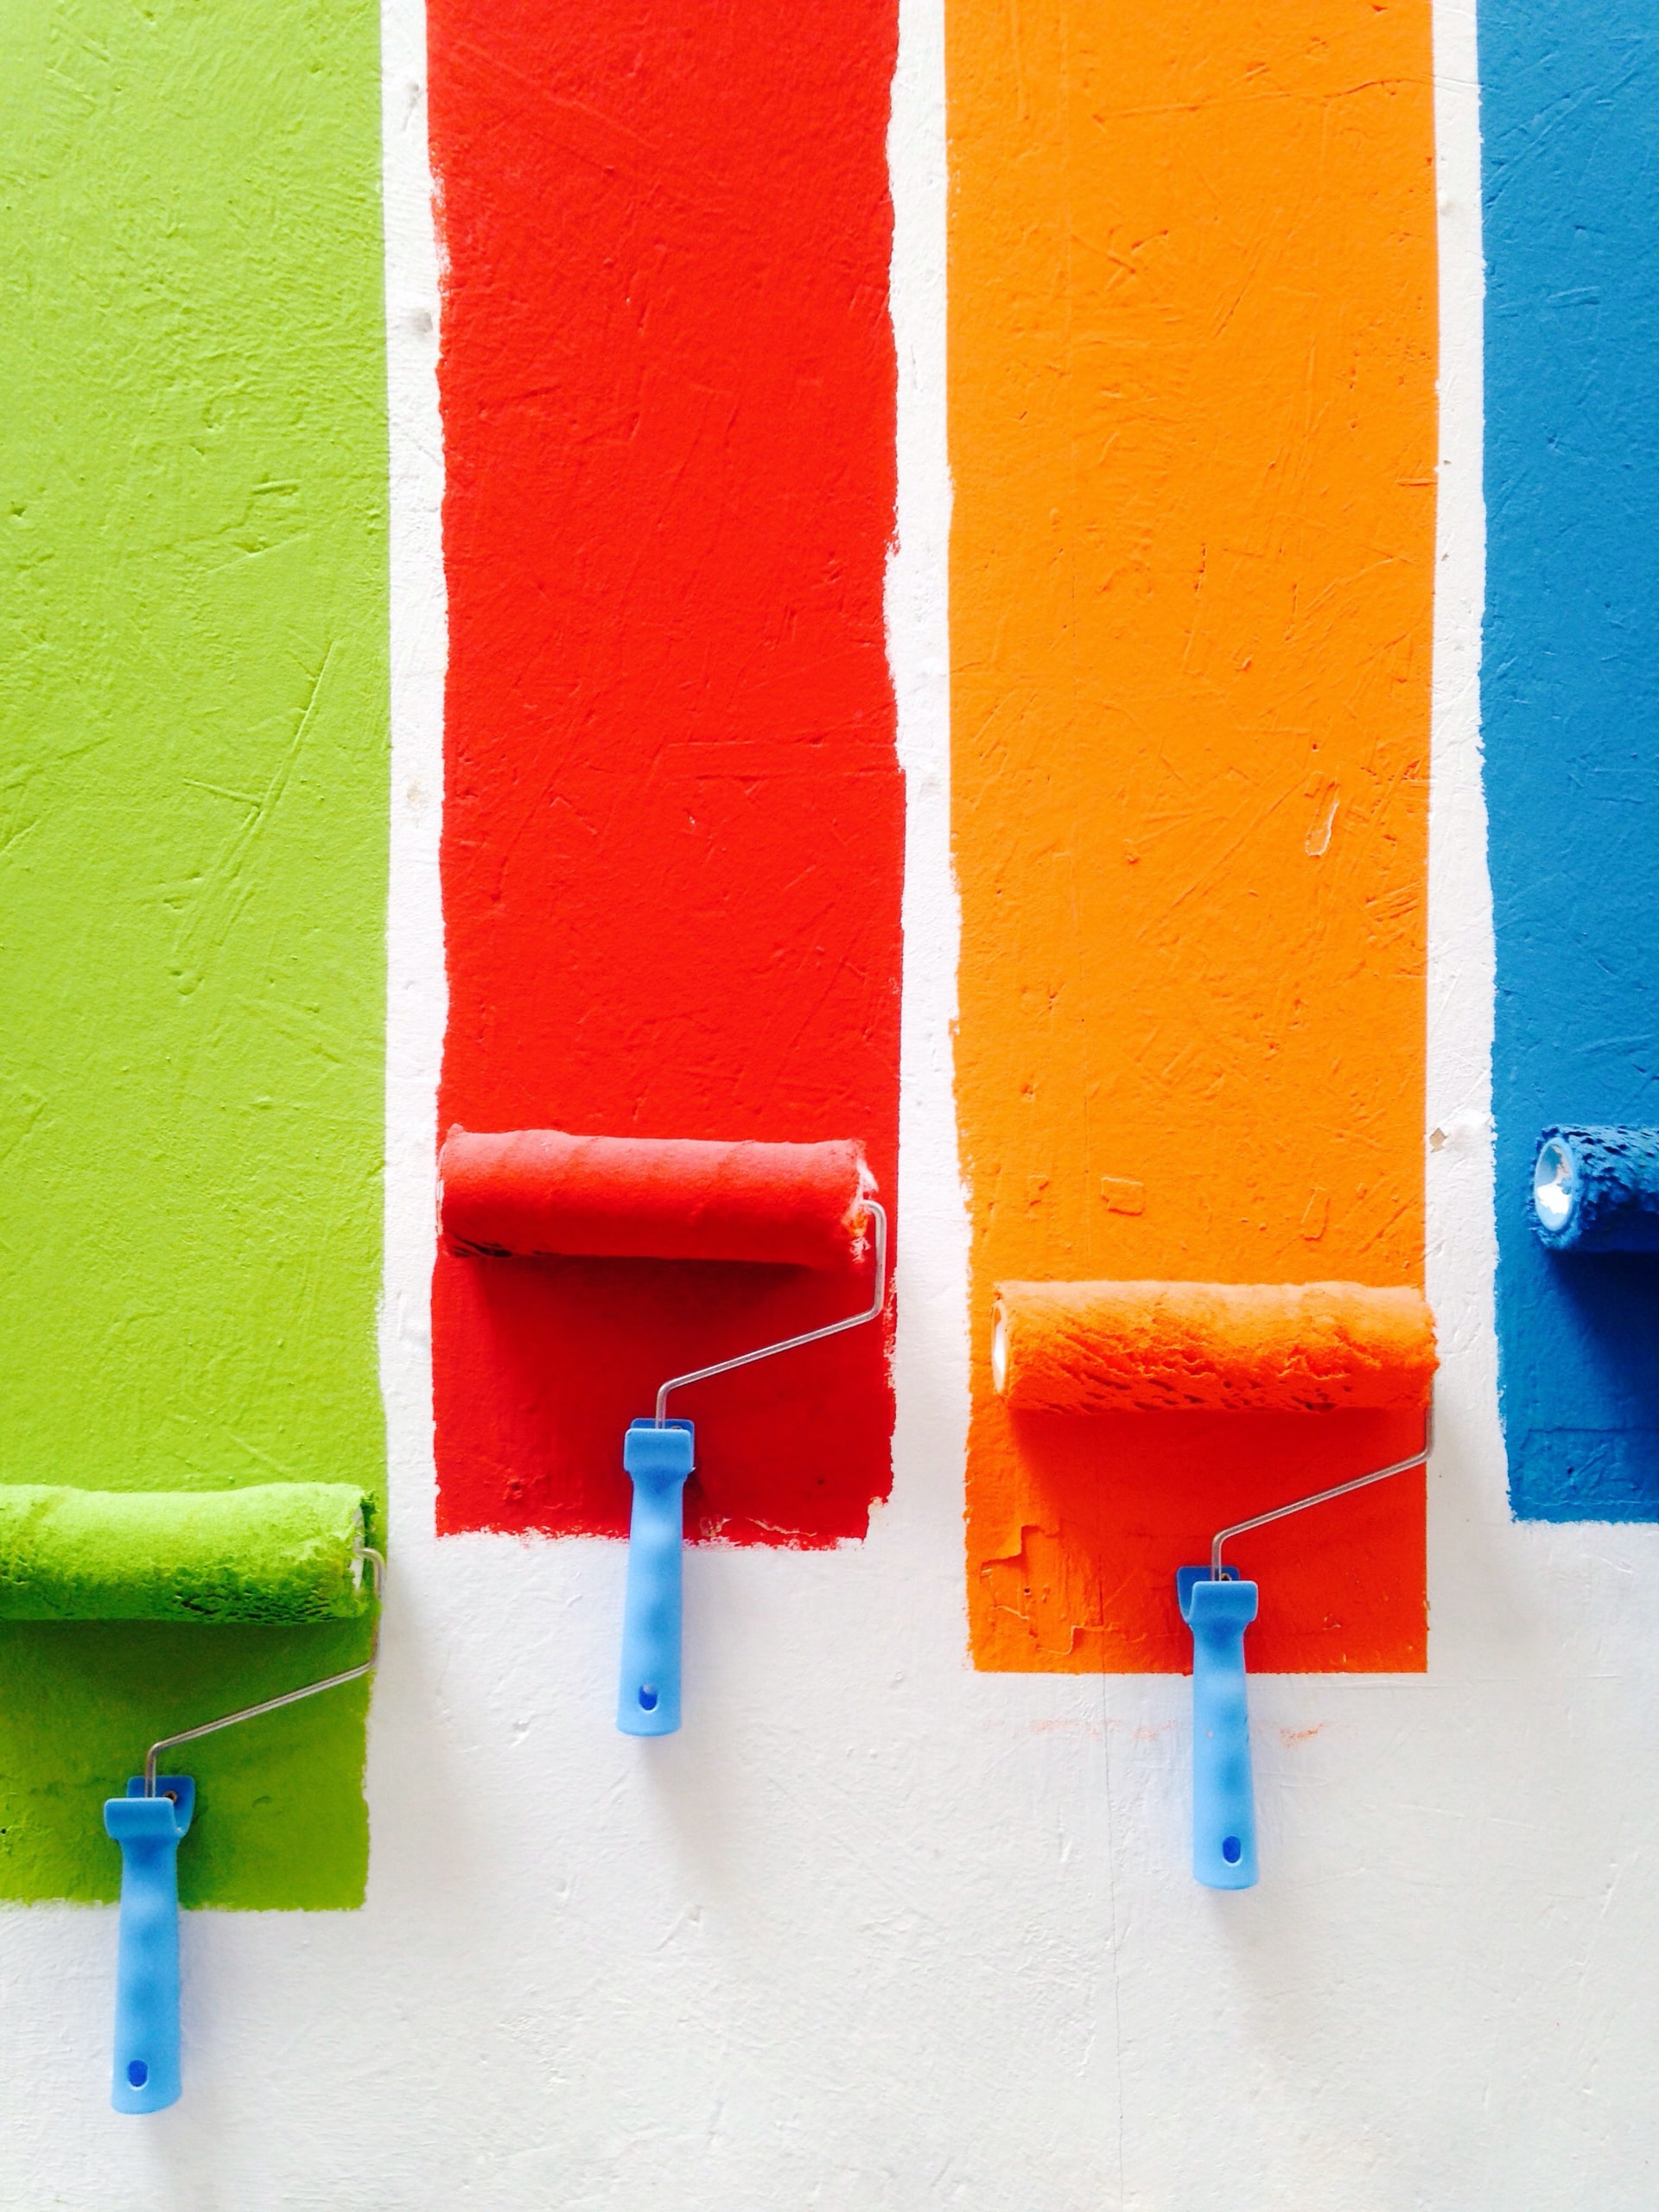 Four paint rollers painting on a white wall - green, red, orange, blue